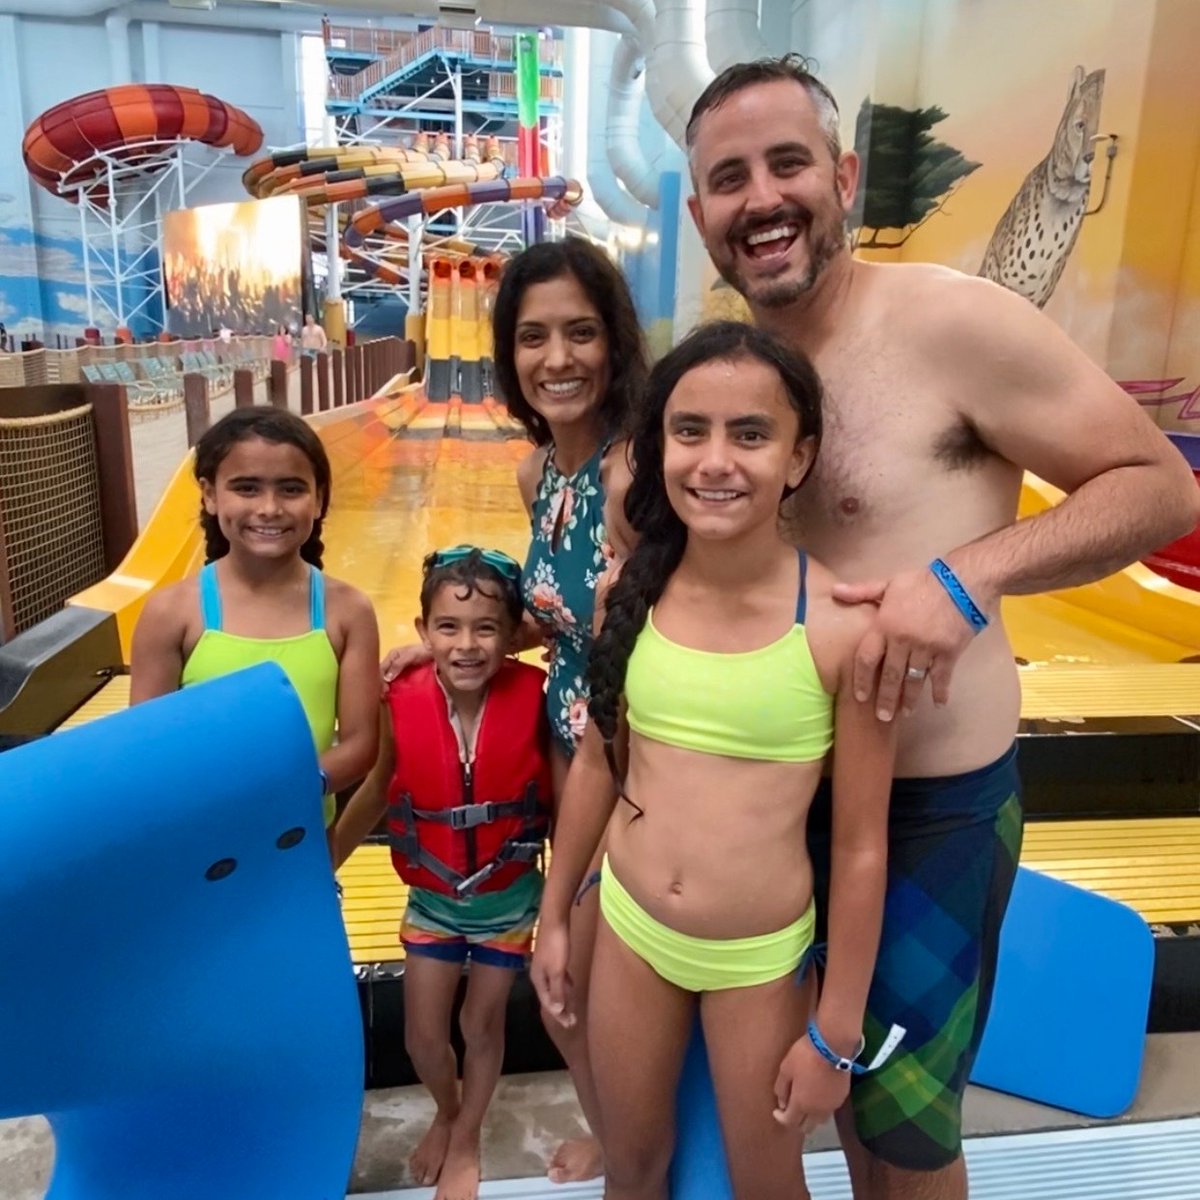 Slide into the weekend the fun family waterpark way! Who would you choose to race down these slides with? Tag them in the comments. #familyfun #indoorwaterpark #kalahariresorts #lovekalahari #makemorememories